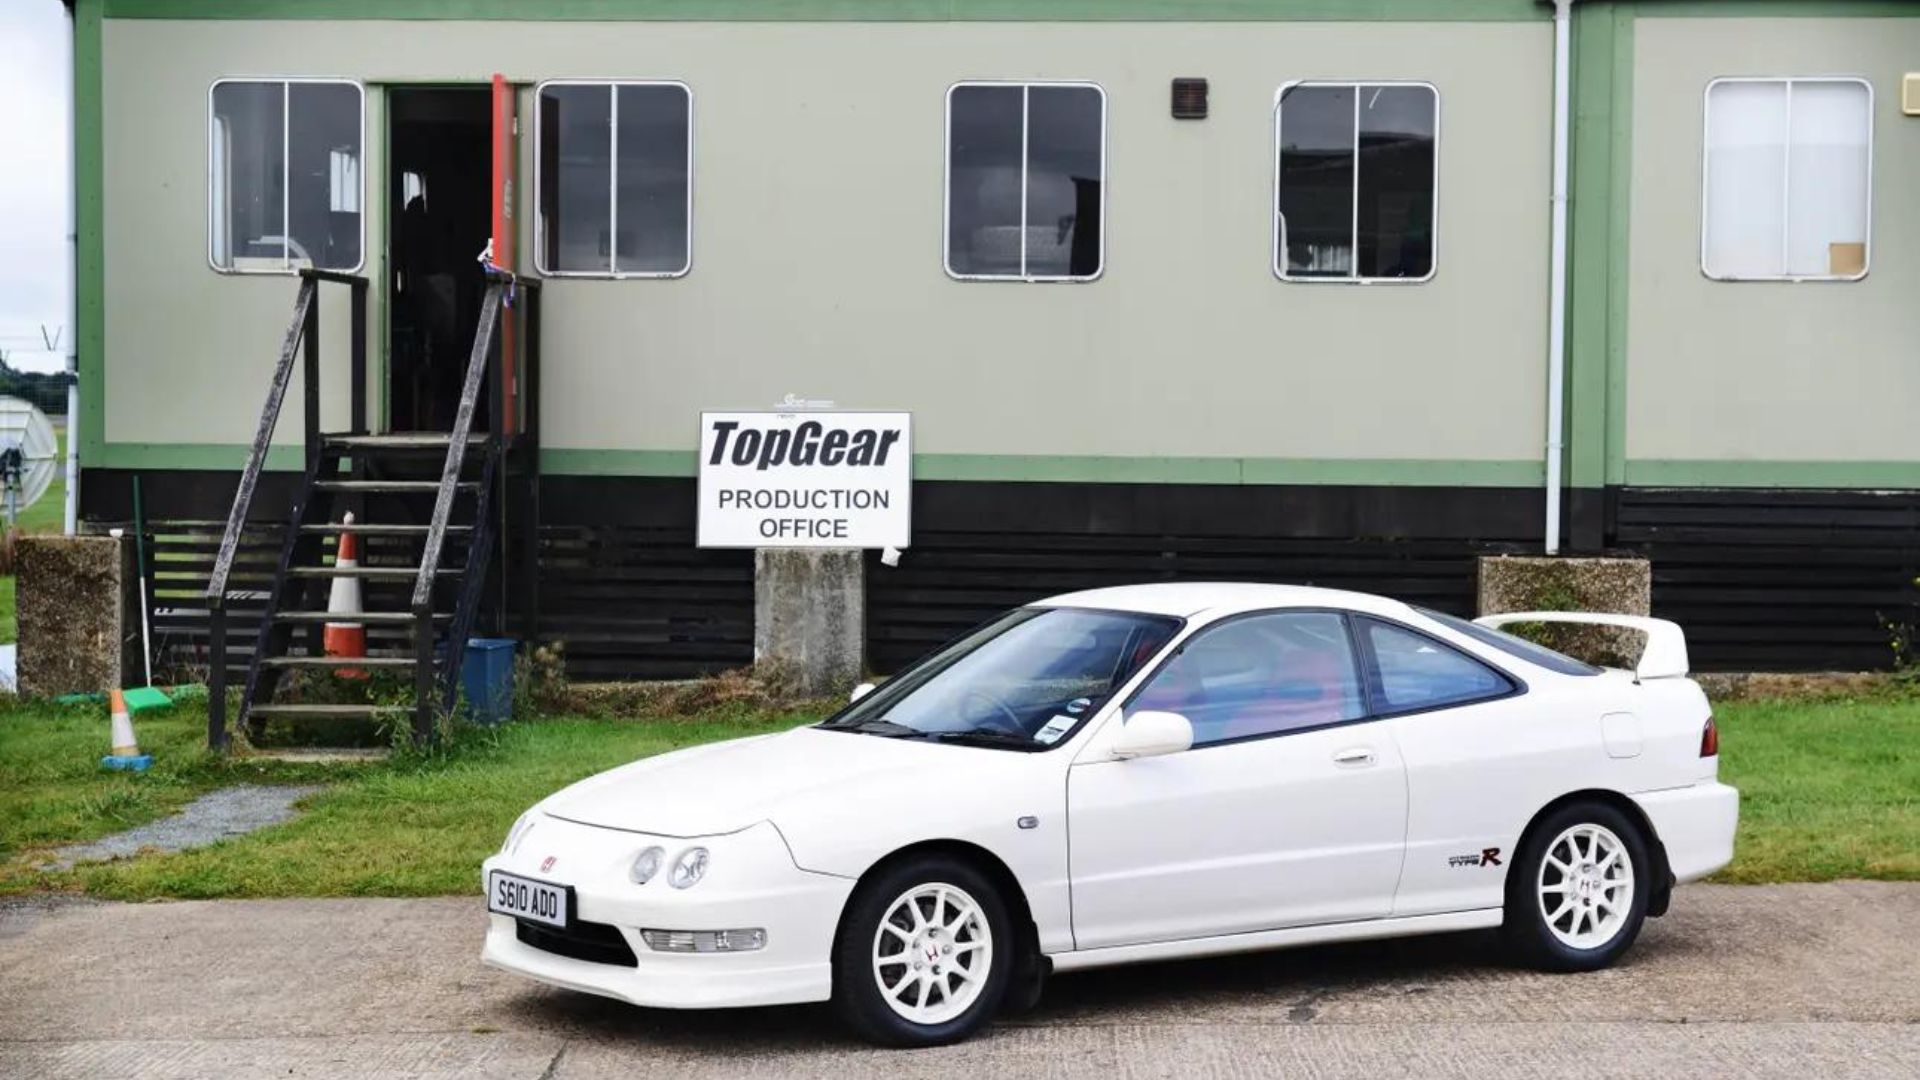 JDM legends that are bargains abroad: Honda Integra Type R